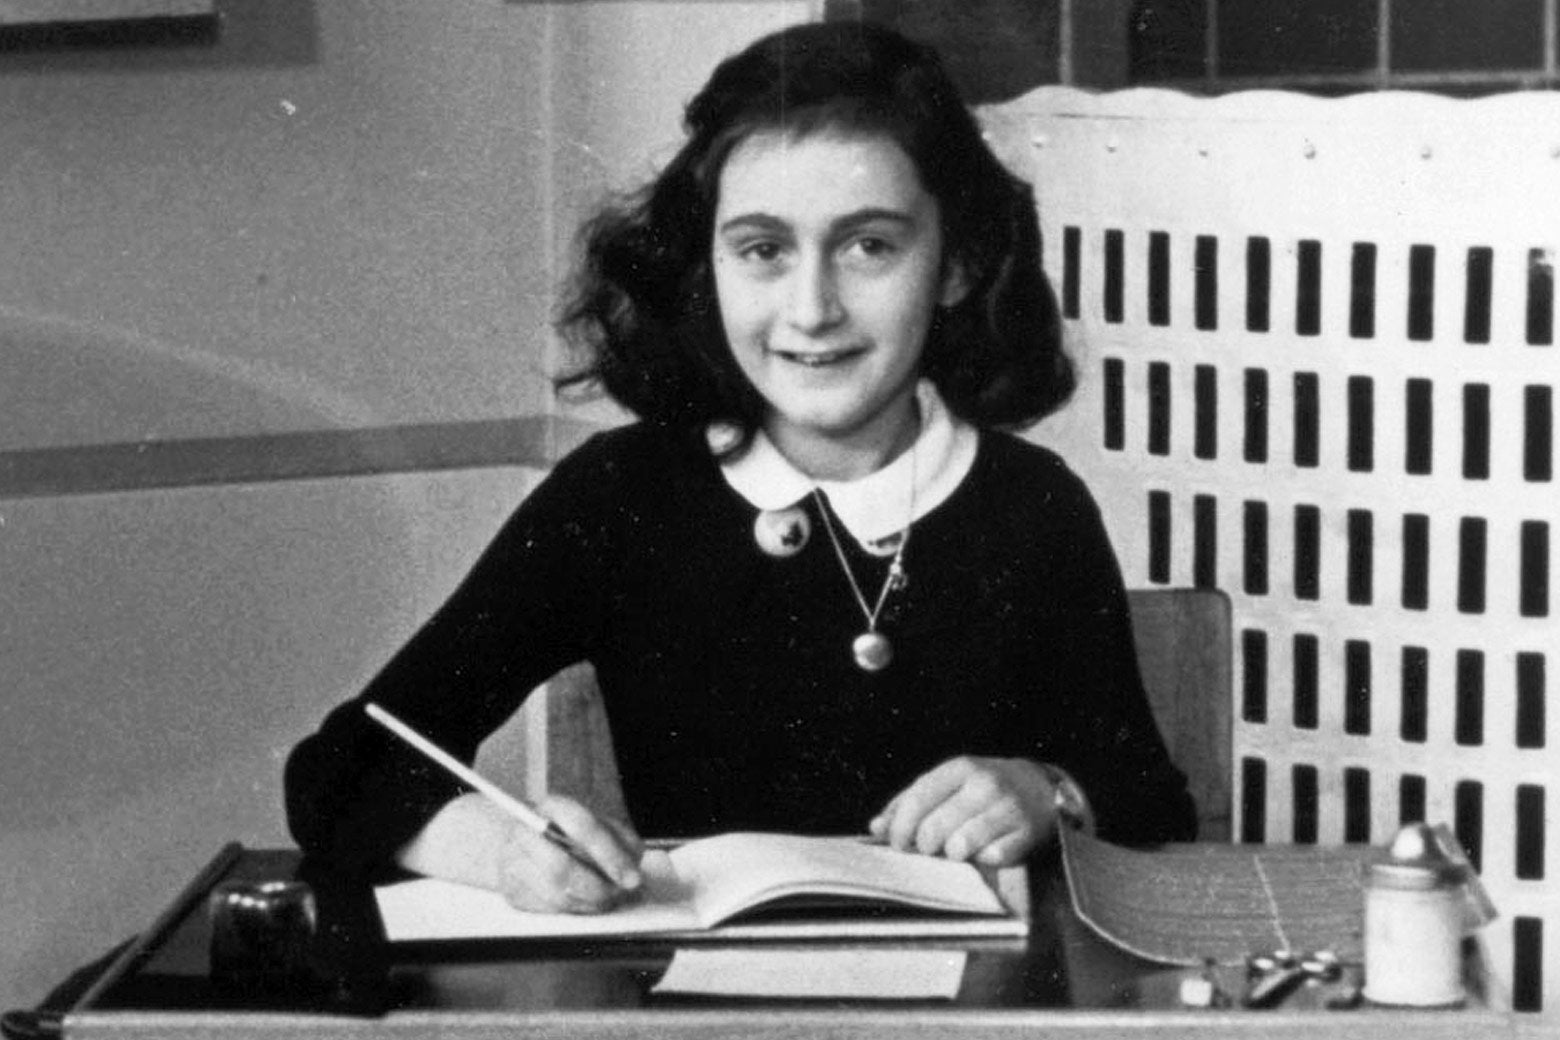 Photo of Anne Frank sitting at a school desk and holding a pencil to an open notebook page.